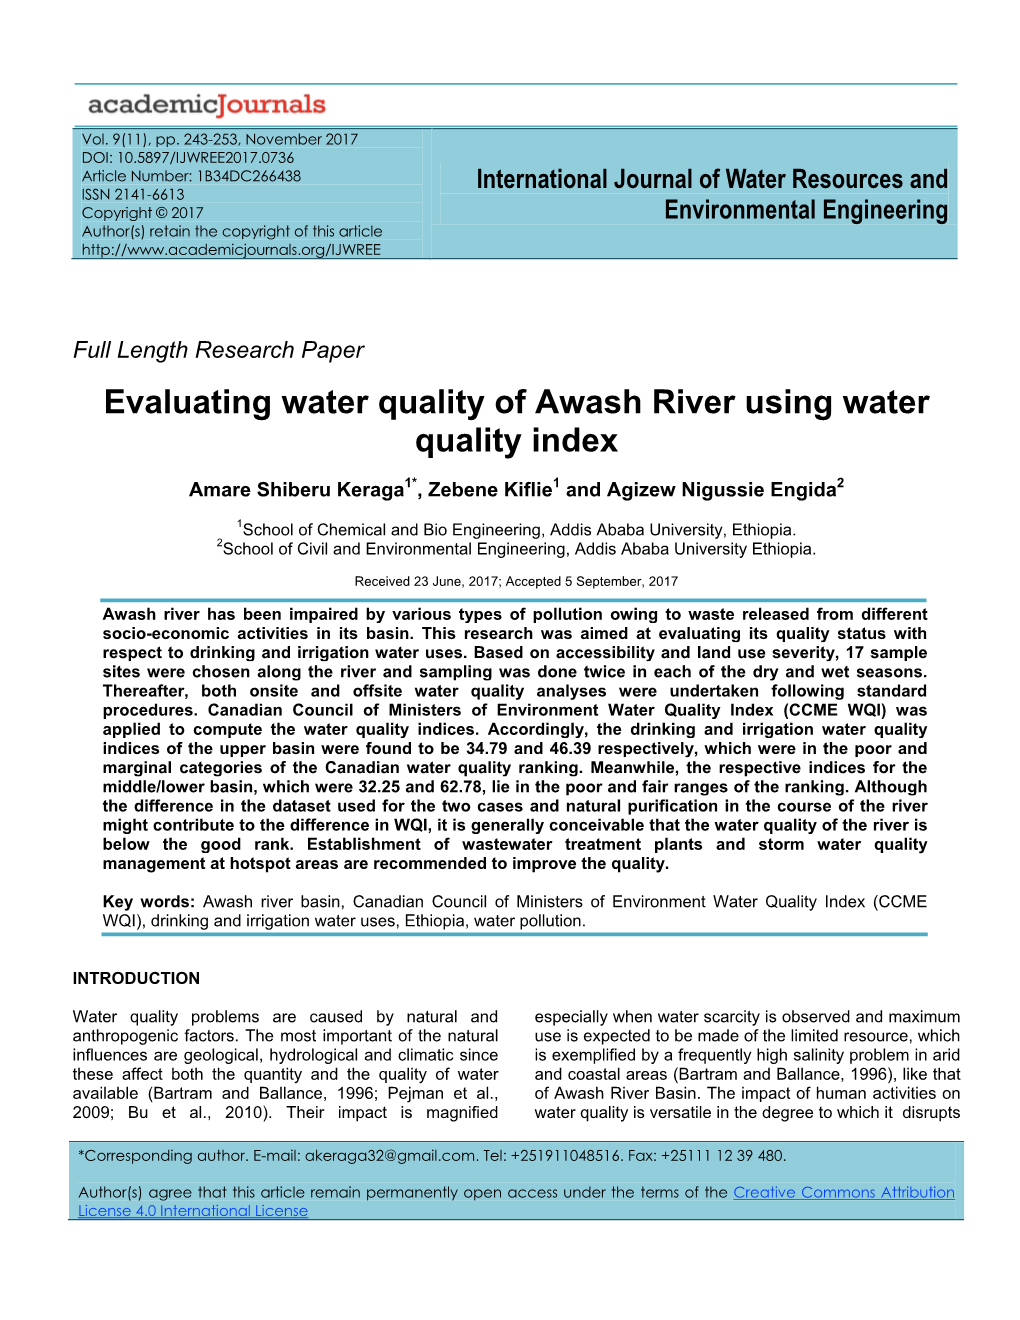 Evaluating Water Quality of Awash River Using Water Quality Index